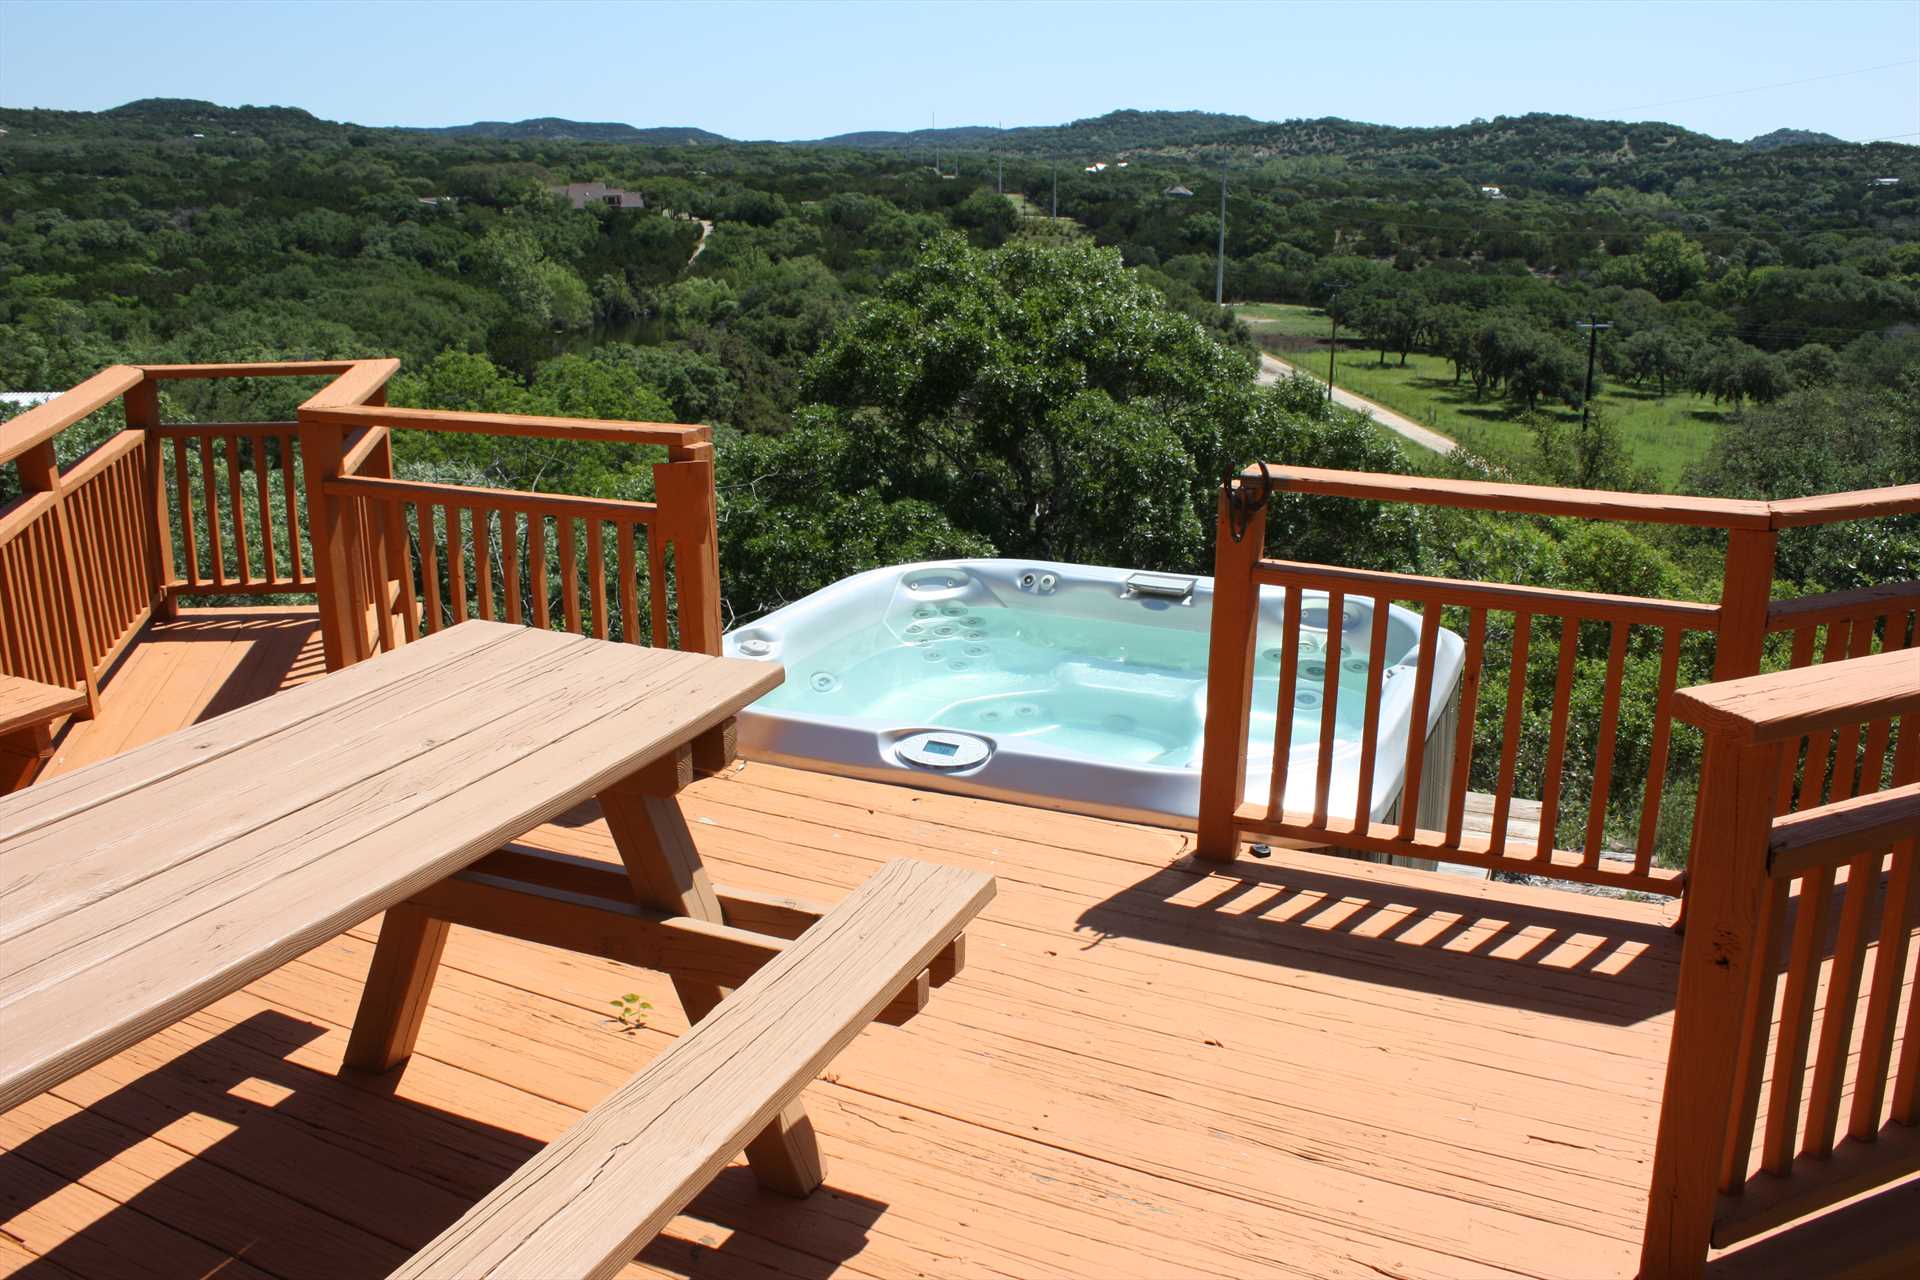                                                 Okay, granted, there are other rentals that have hot tubs. But do theirs have THAT view?